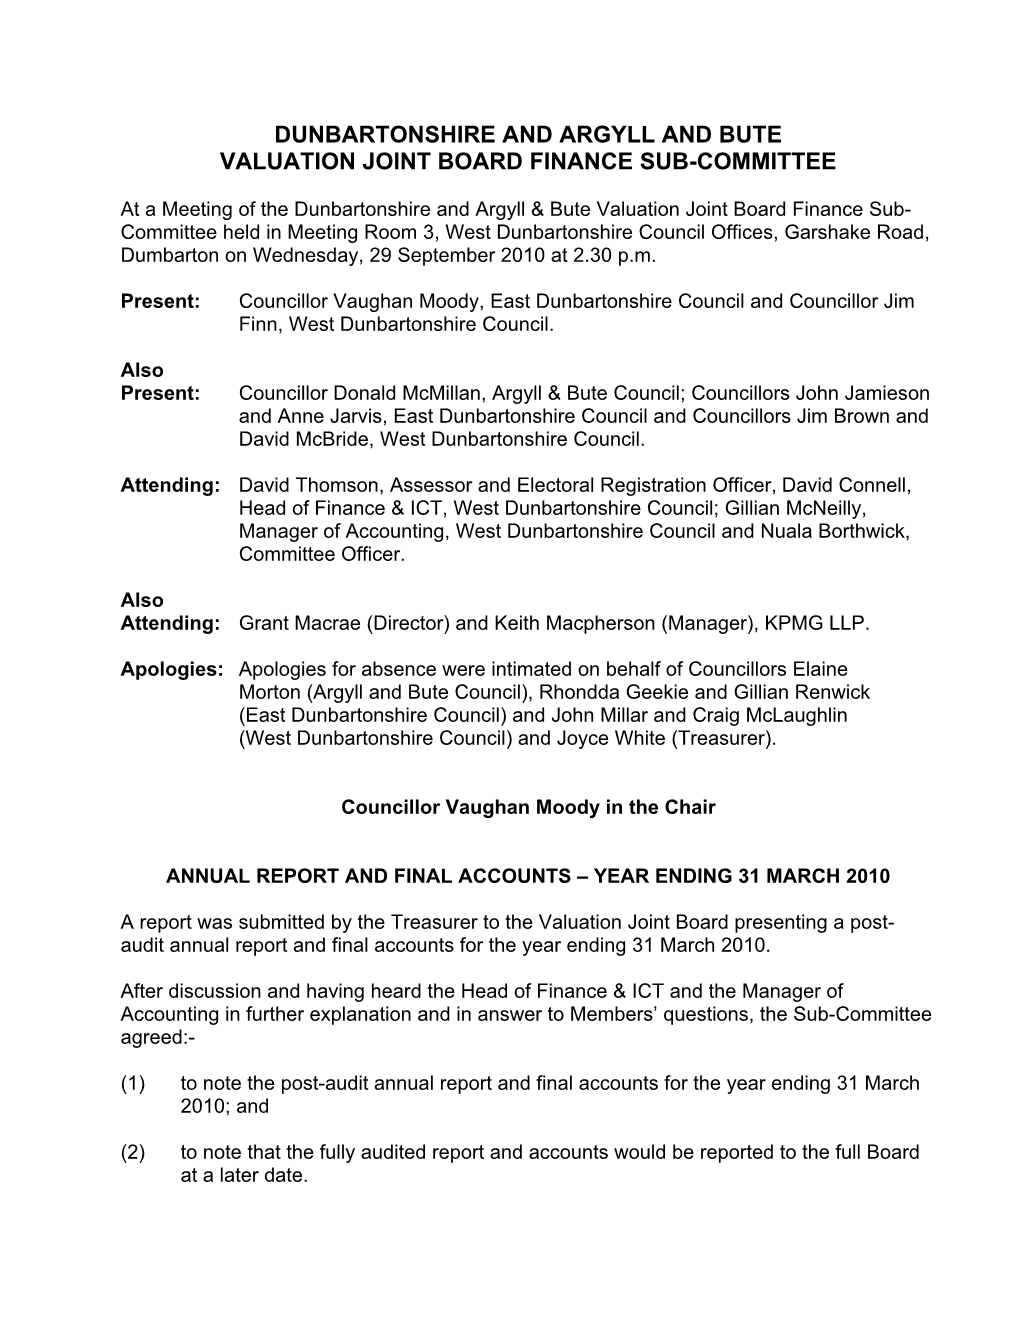 Dunbartonshire and Argyll & Bute Valuation J Oint Board